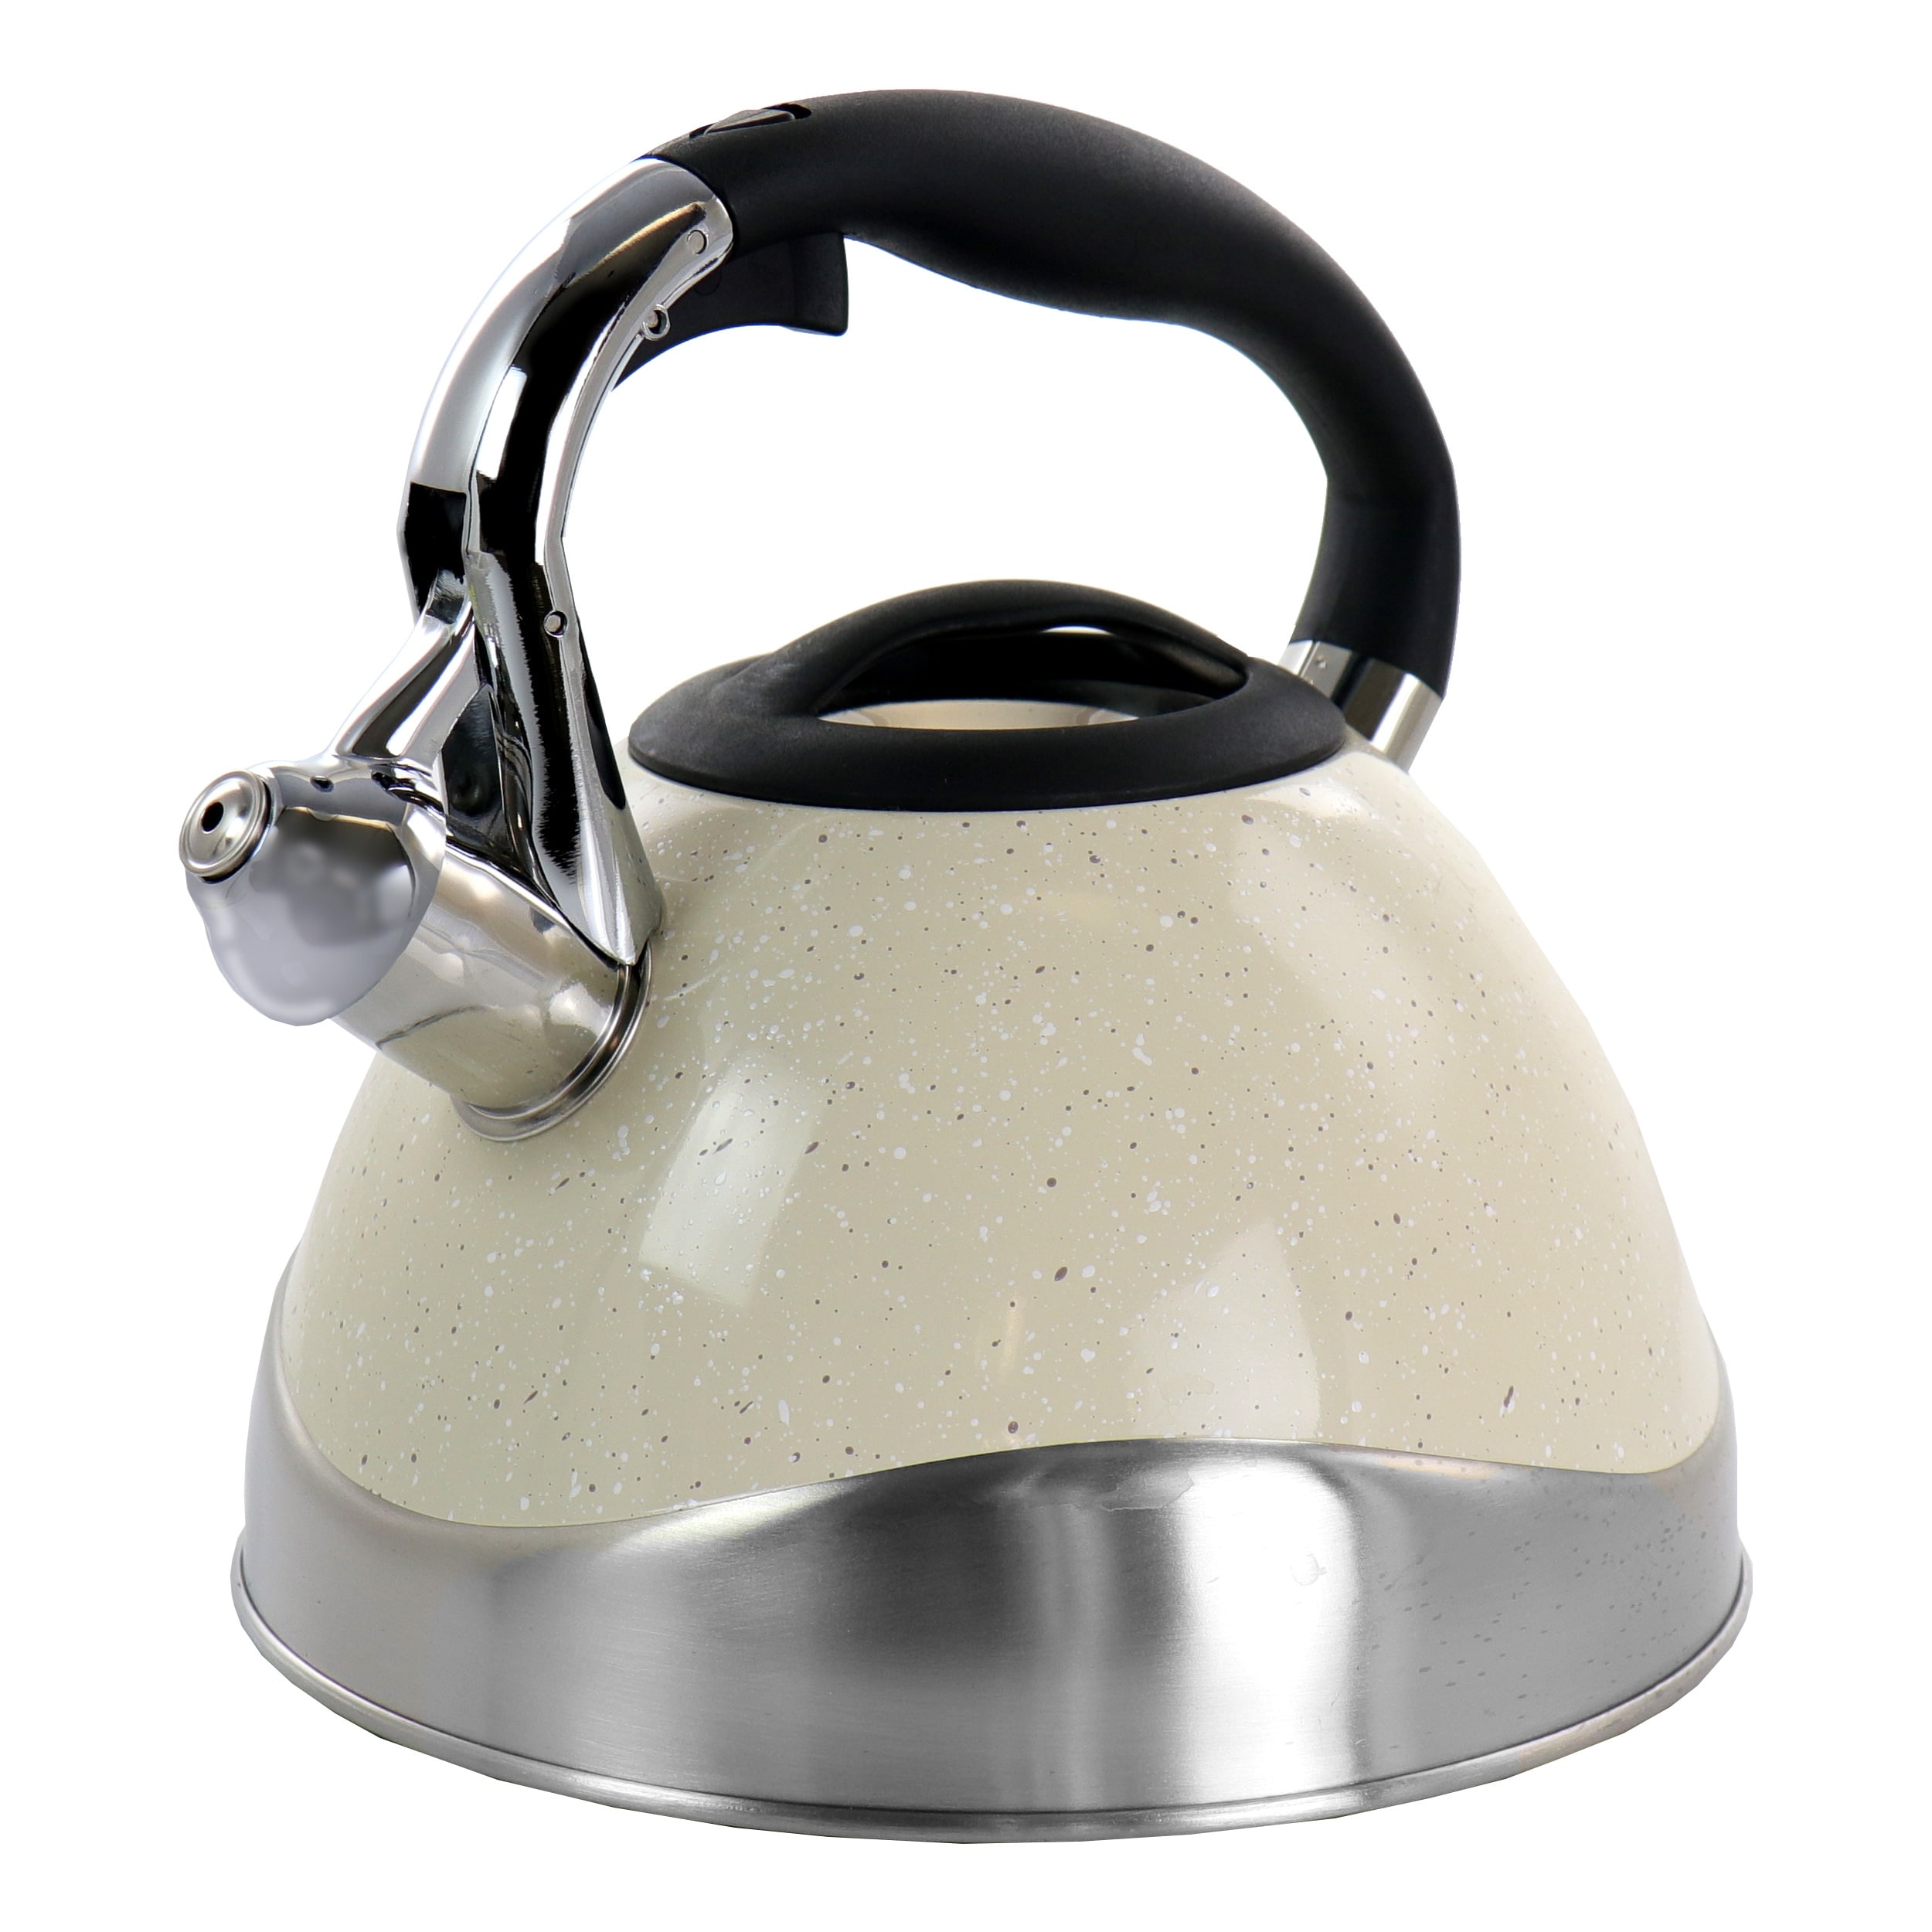 https://ak1.ostkcdn.com/images/products/is/images/direct/9365bcc9374e0b498088ca14817d41fb0f42bafa/3.1-Quart-Stovetop-Whistling-Kettle-in-Cream.jpg